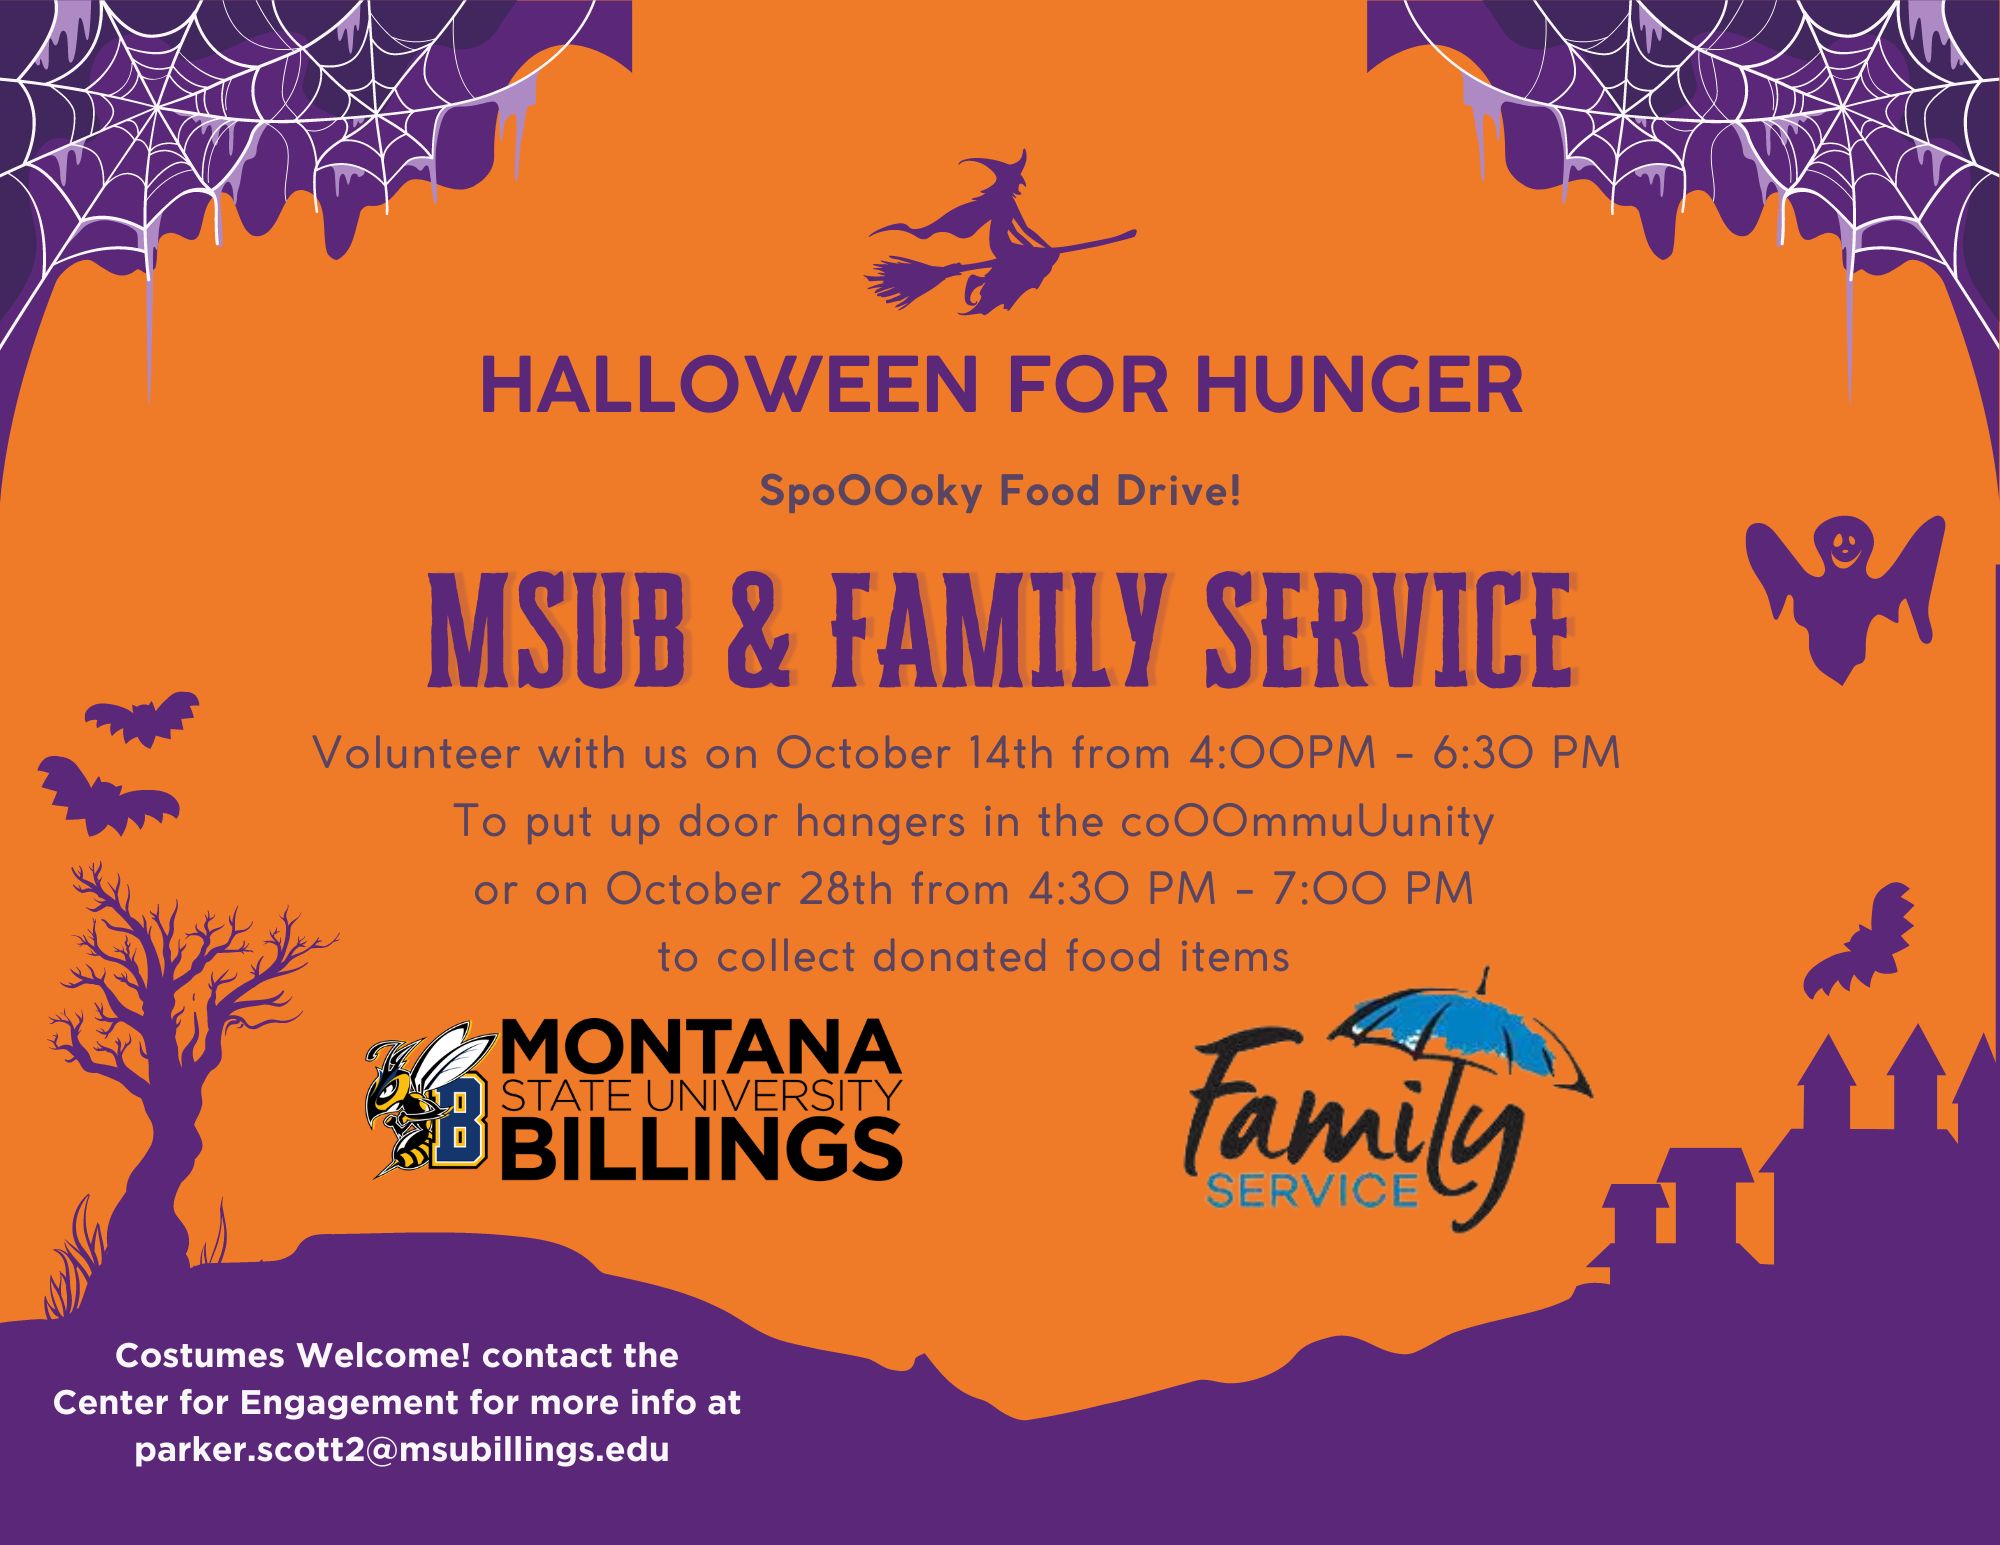 Halloween for Hunger. Spo00oky Food Drive!  MSUB & Family Service. Volunteer with us on October 14th from 4:00PM - 6:30 PM  To put up door hangers in the coOOmmuUunity or on October 28th from 4:30 PM - 7:00 PM to collect donated food items. Costumes Welcome! contact the  Center for Engagement for more info at  parker.scott2@msubillings.edu